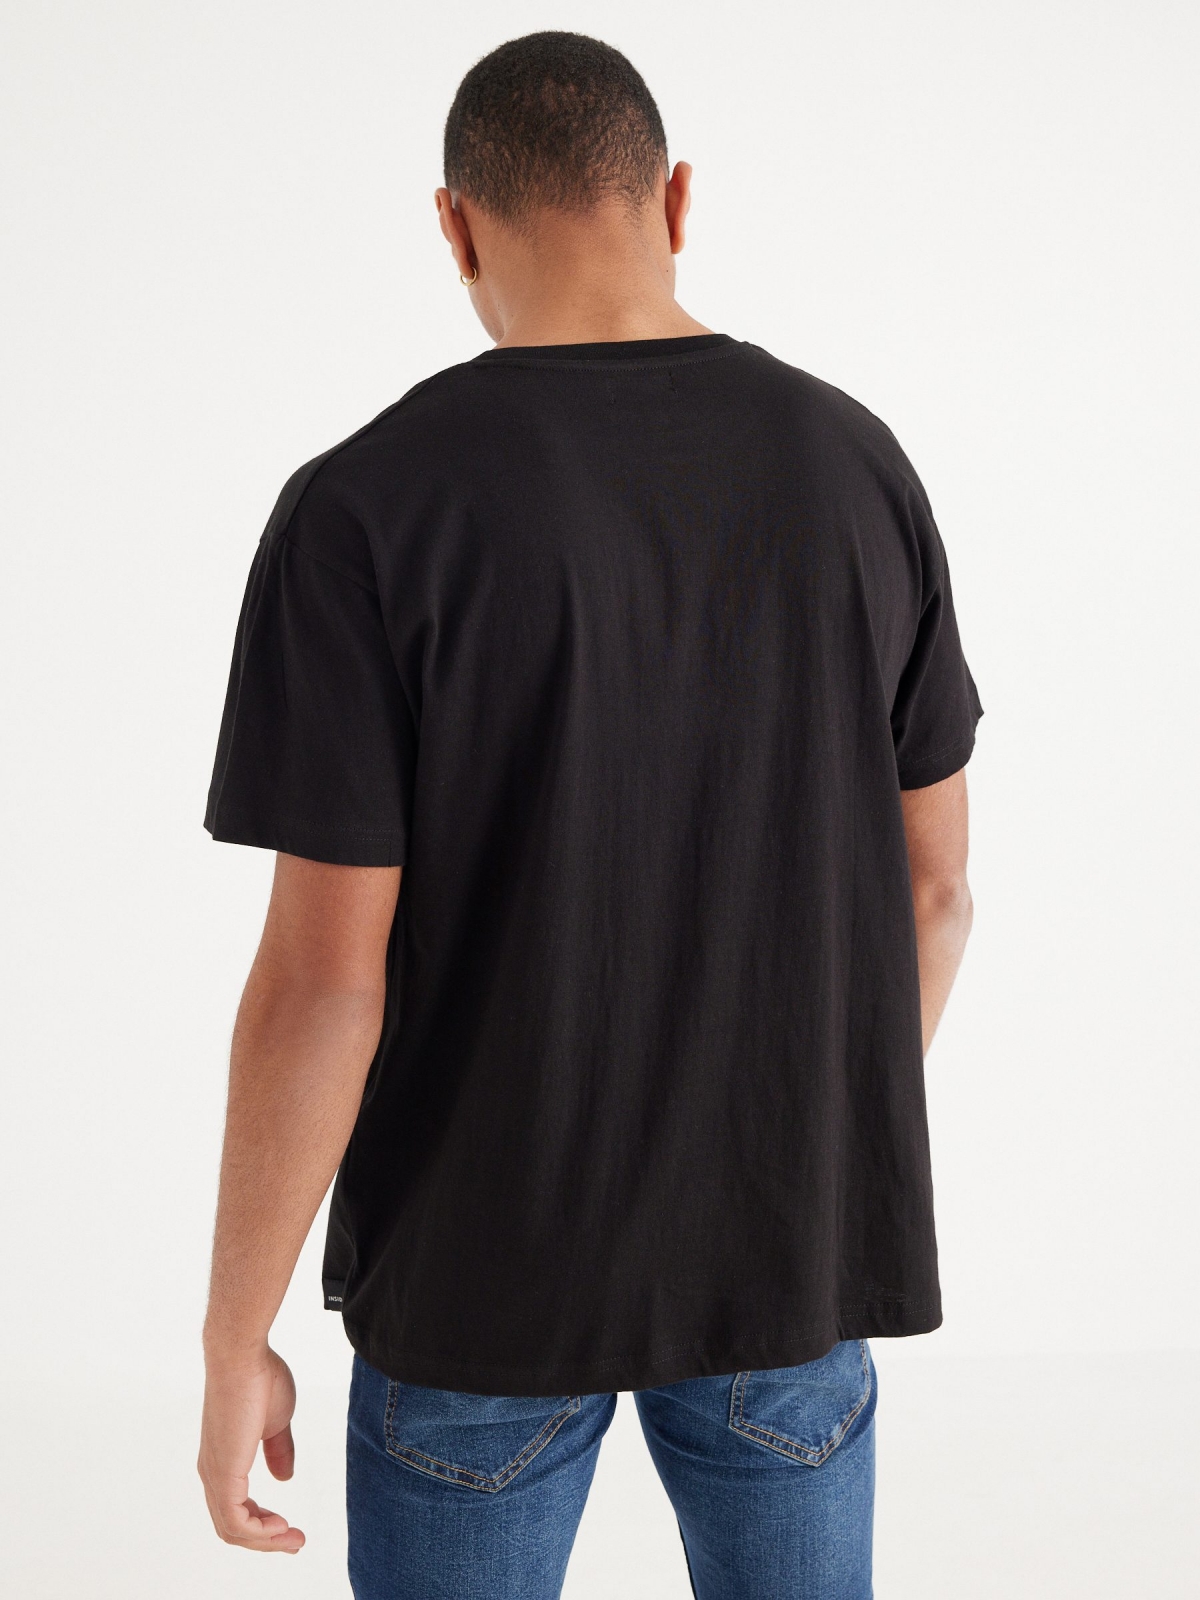 Contrast text t-shirt black middle back view